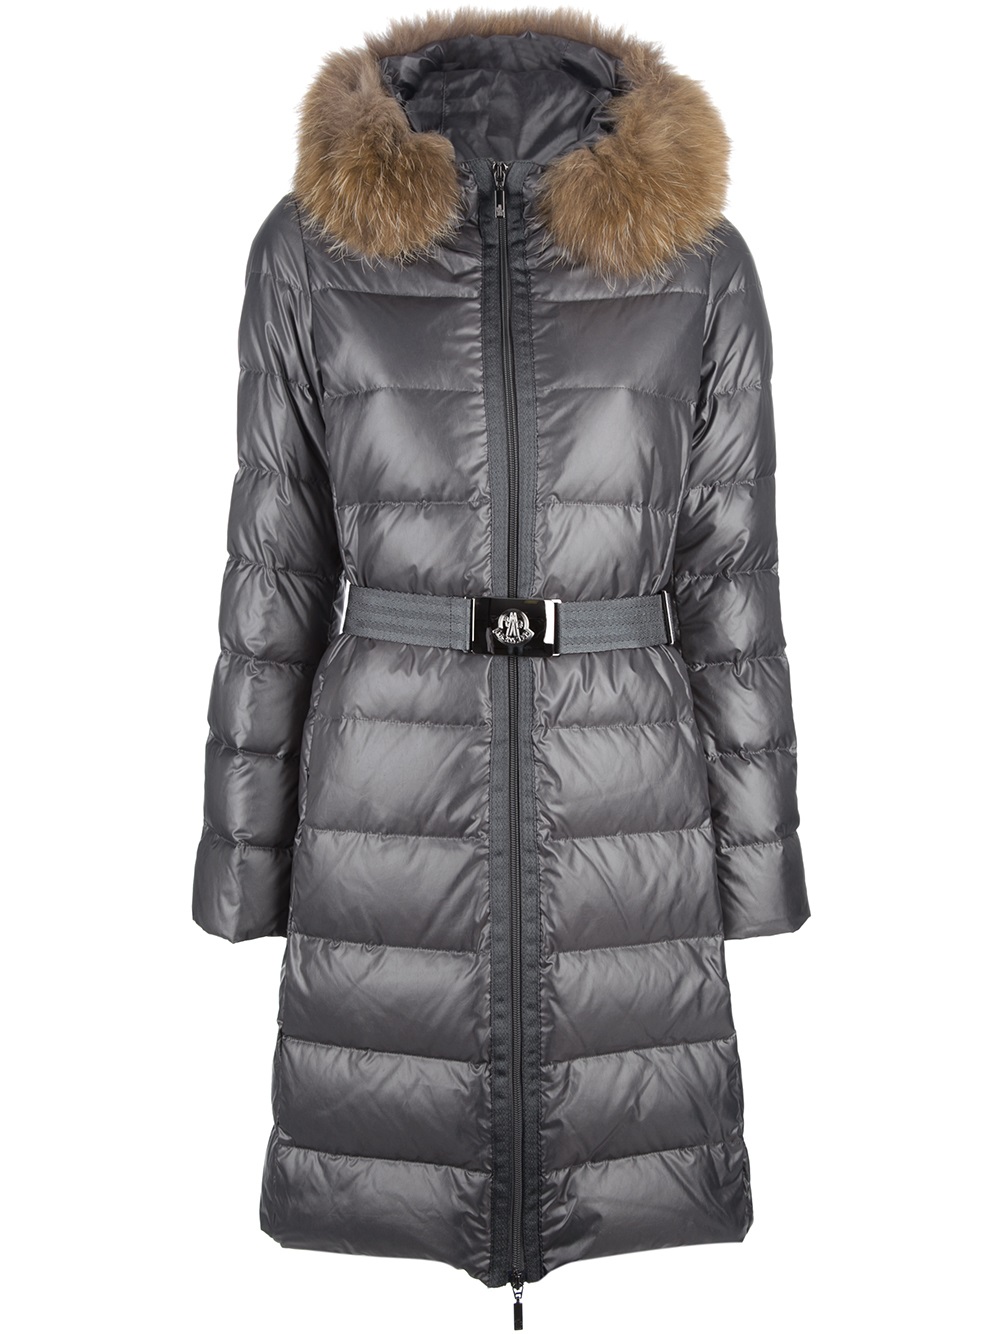 moncler nantesfur coat Cheaper Than Retail Price> Buy Clothing, Accessories  and lifestyle products for women & men -